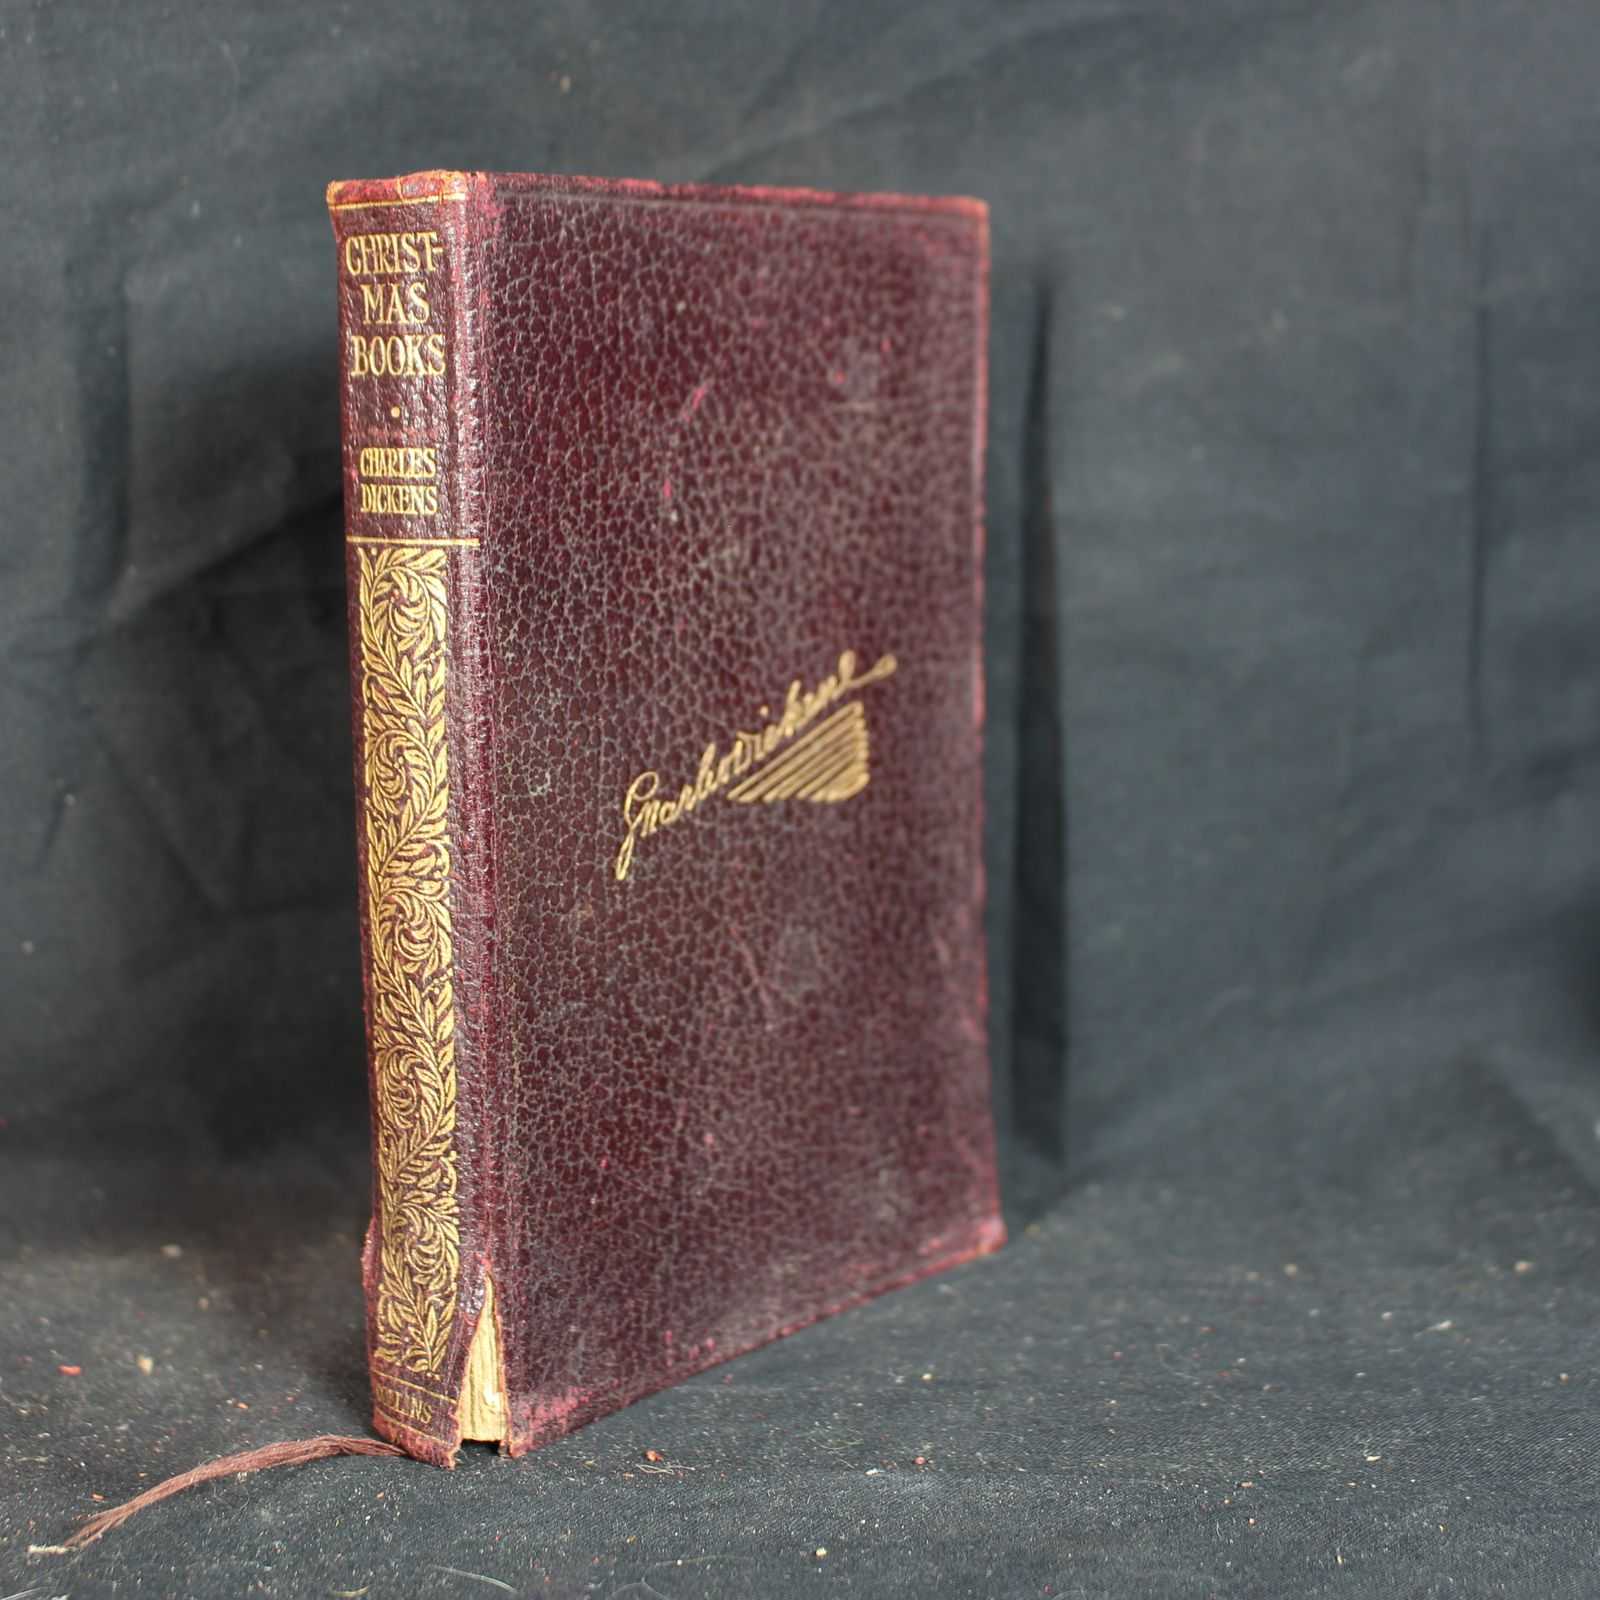 Vintage Hardcover Christmas Books: A Christmas Carol, The Chimes, The Cricket on the Hearth, The Battle of Life, The Haunted Man by Charles Dickens, 1913 with Inscription